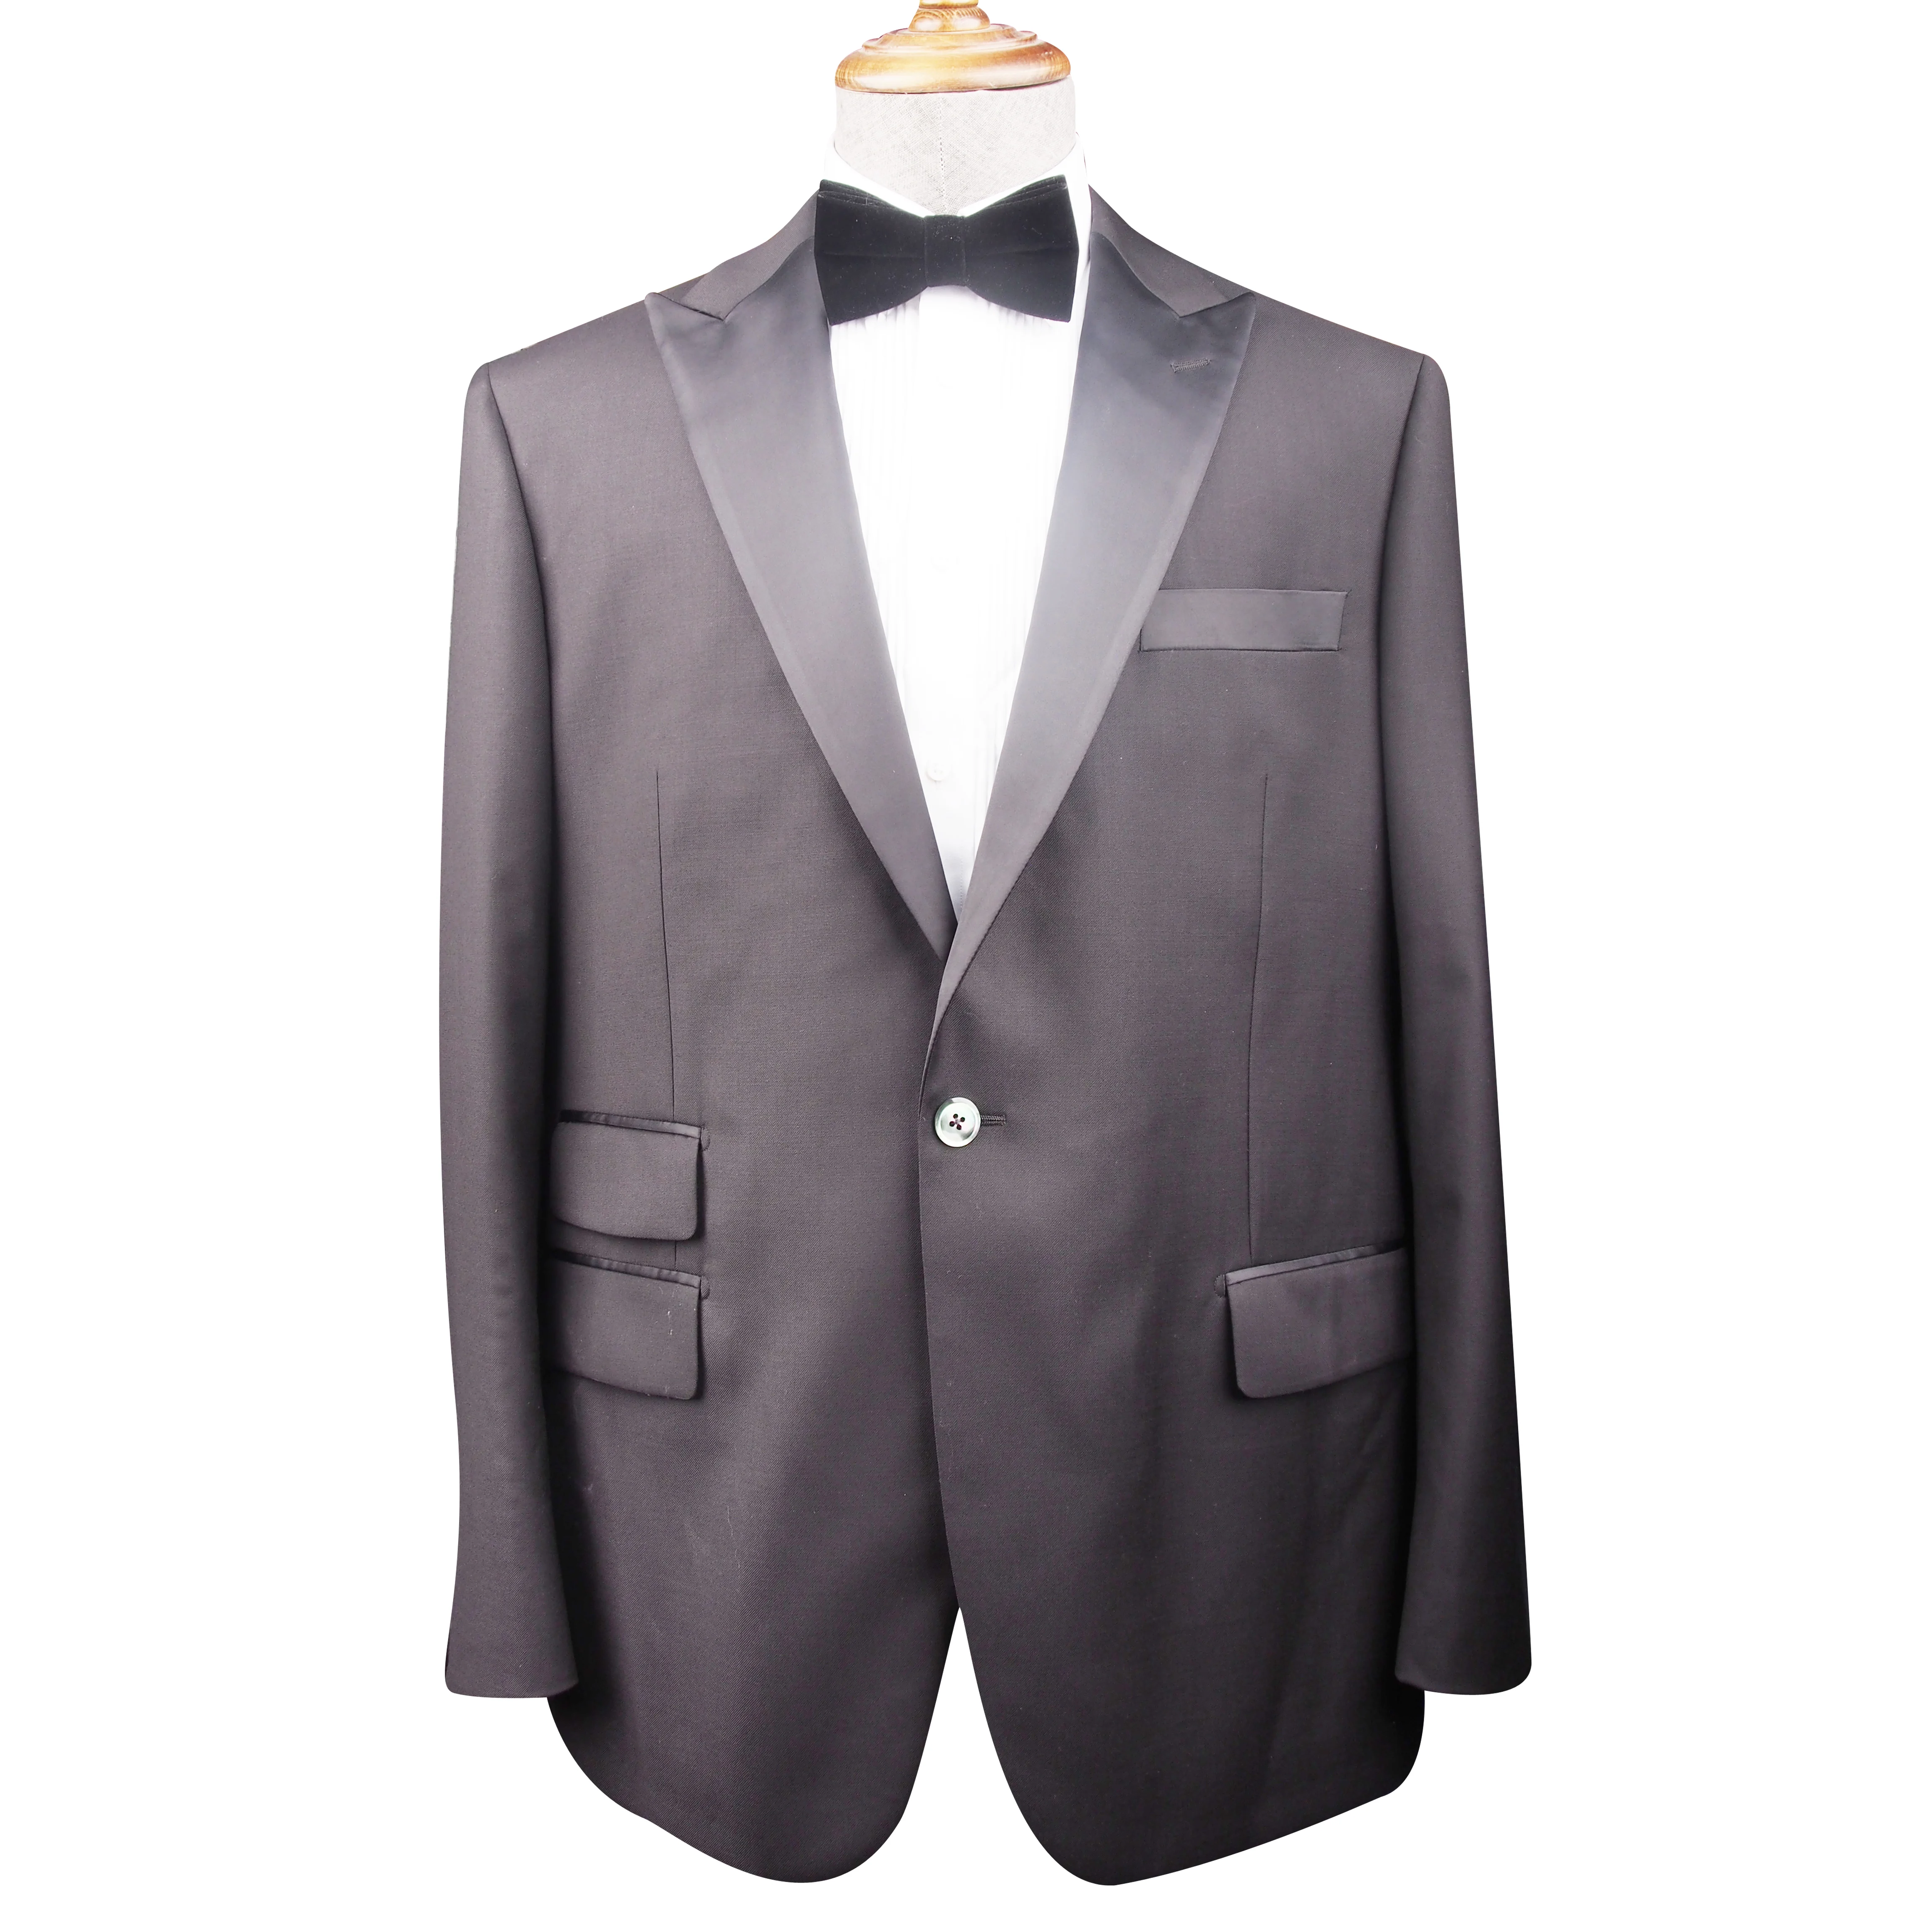 made in China wholesale 2 pezzi 100% Wool  Tuxedo Suit modern men’s suit